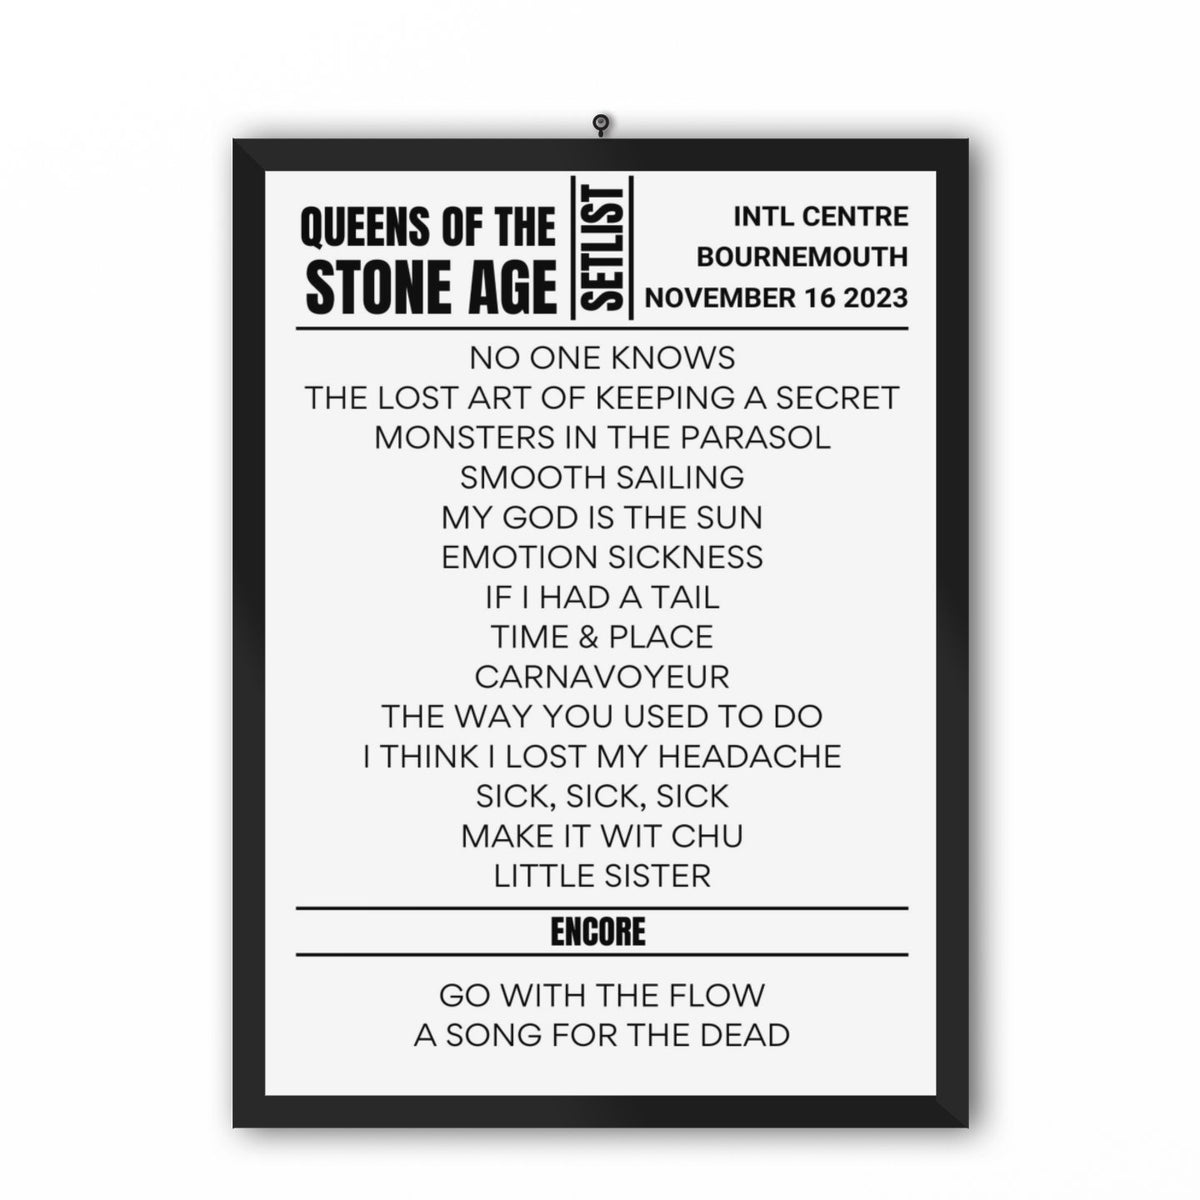 Queens Of The Stone Age Bournemouth Concert Exclusive Replica Setlist